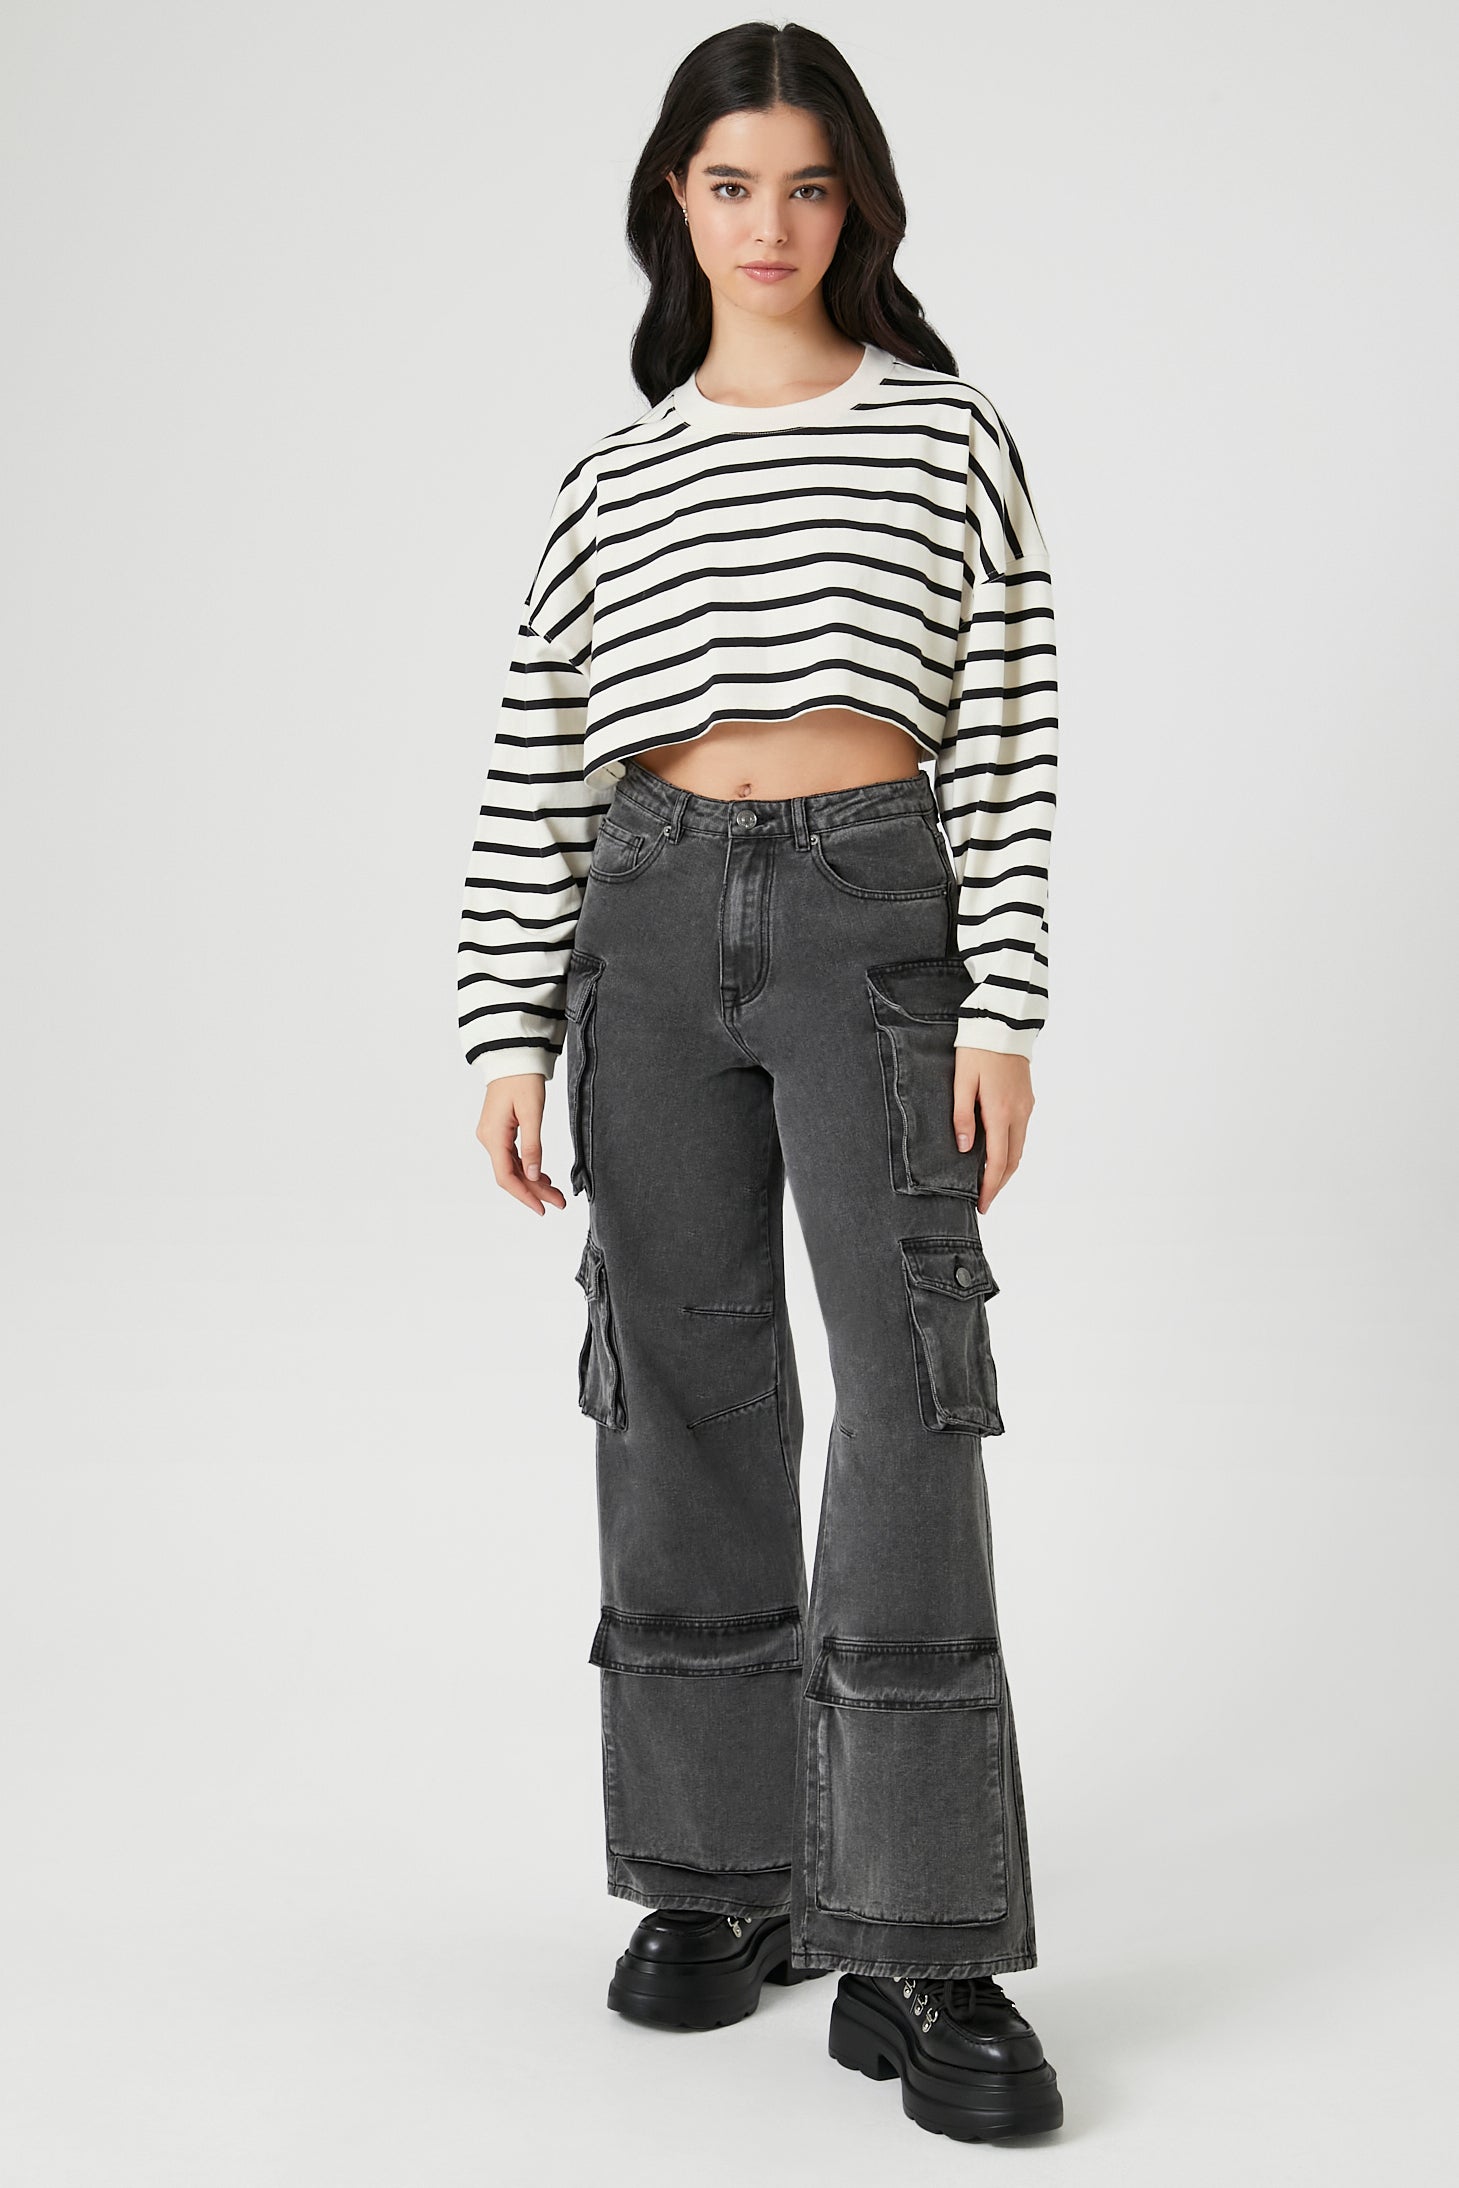 Striped Cropped Long Sleeve Top